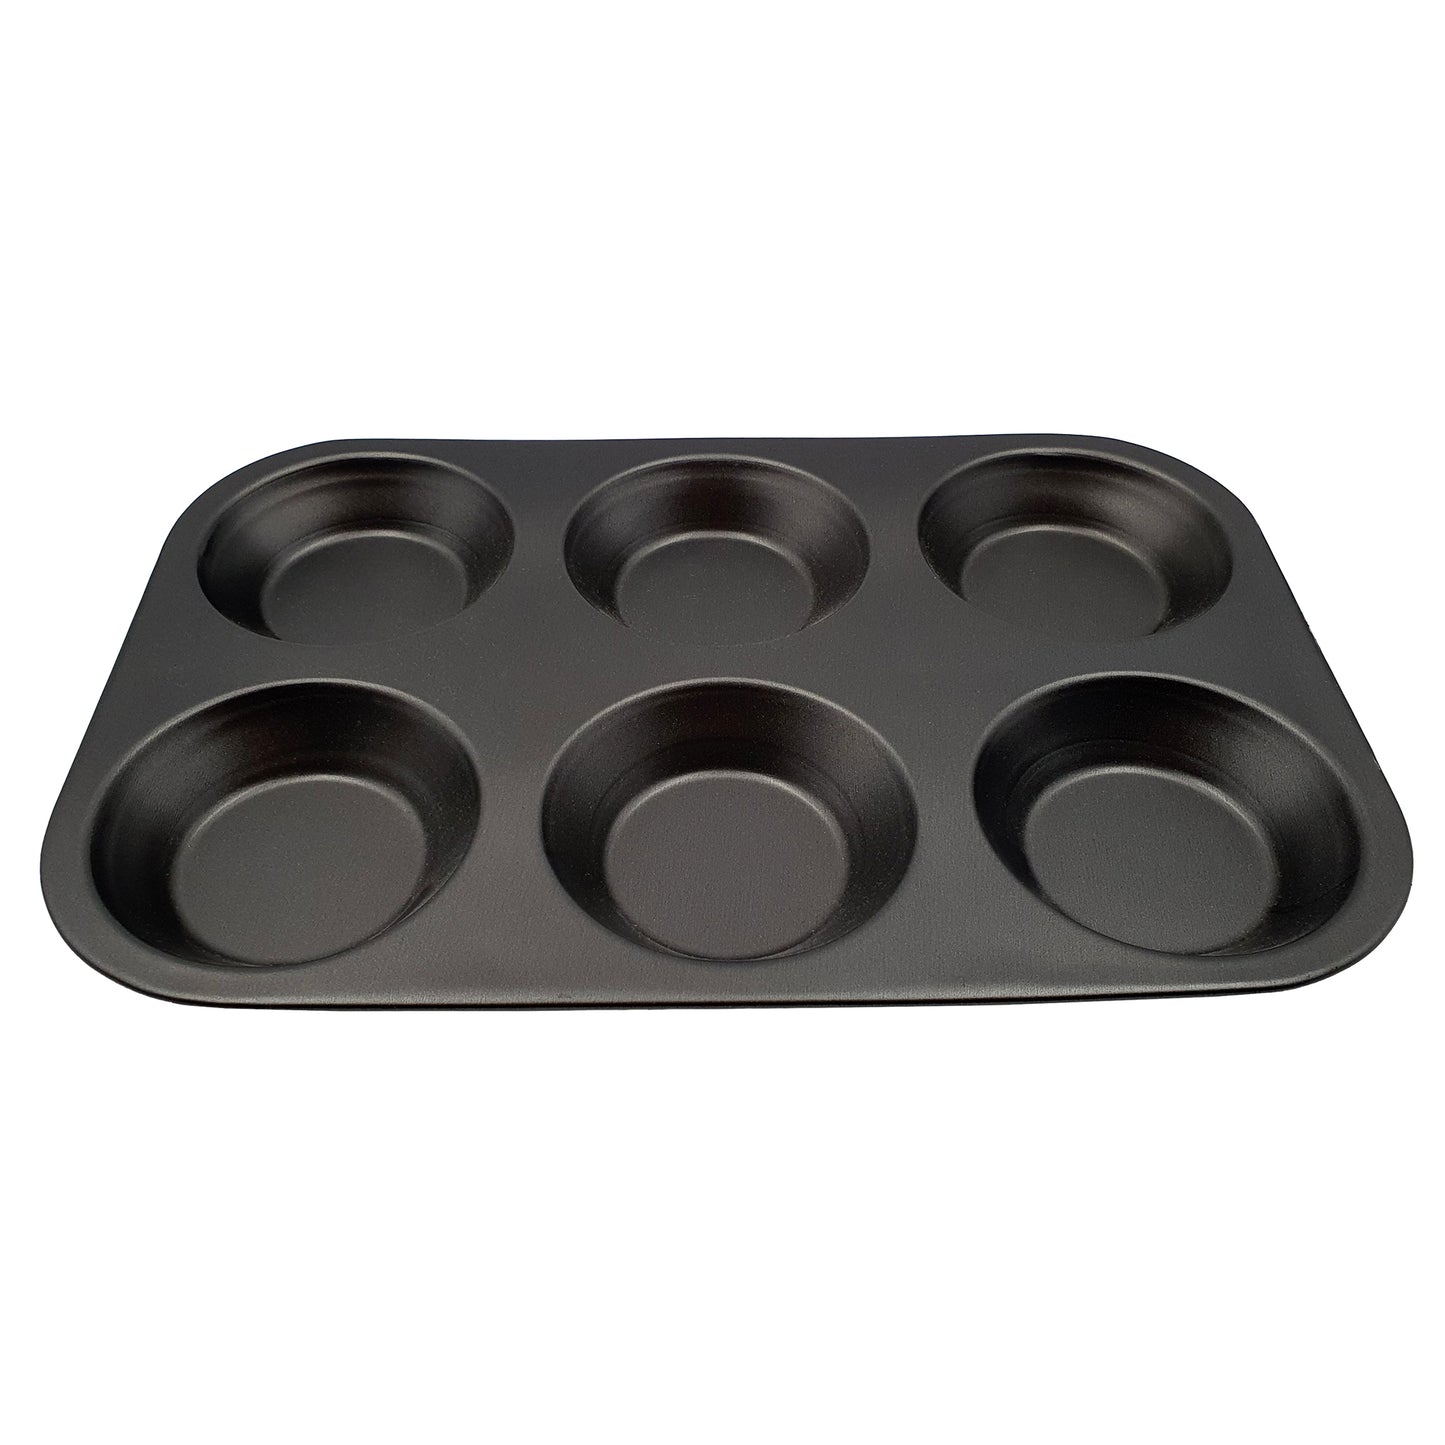 6 cup muffin tray